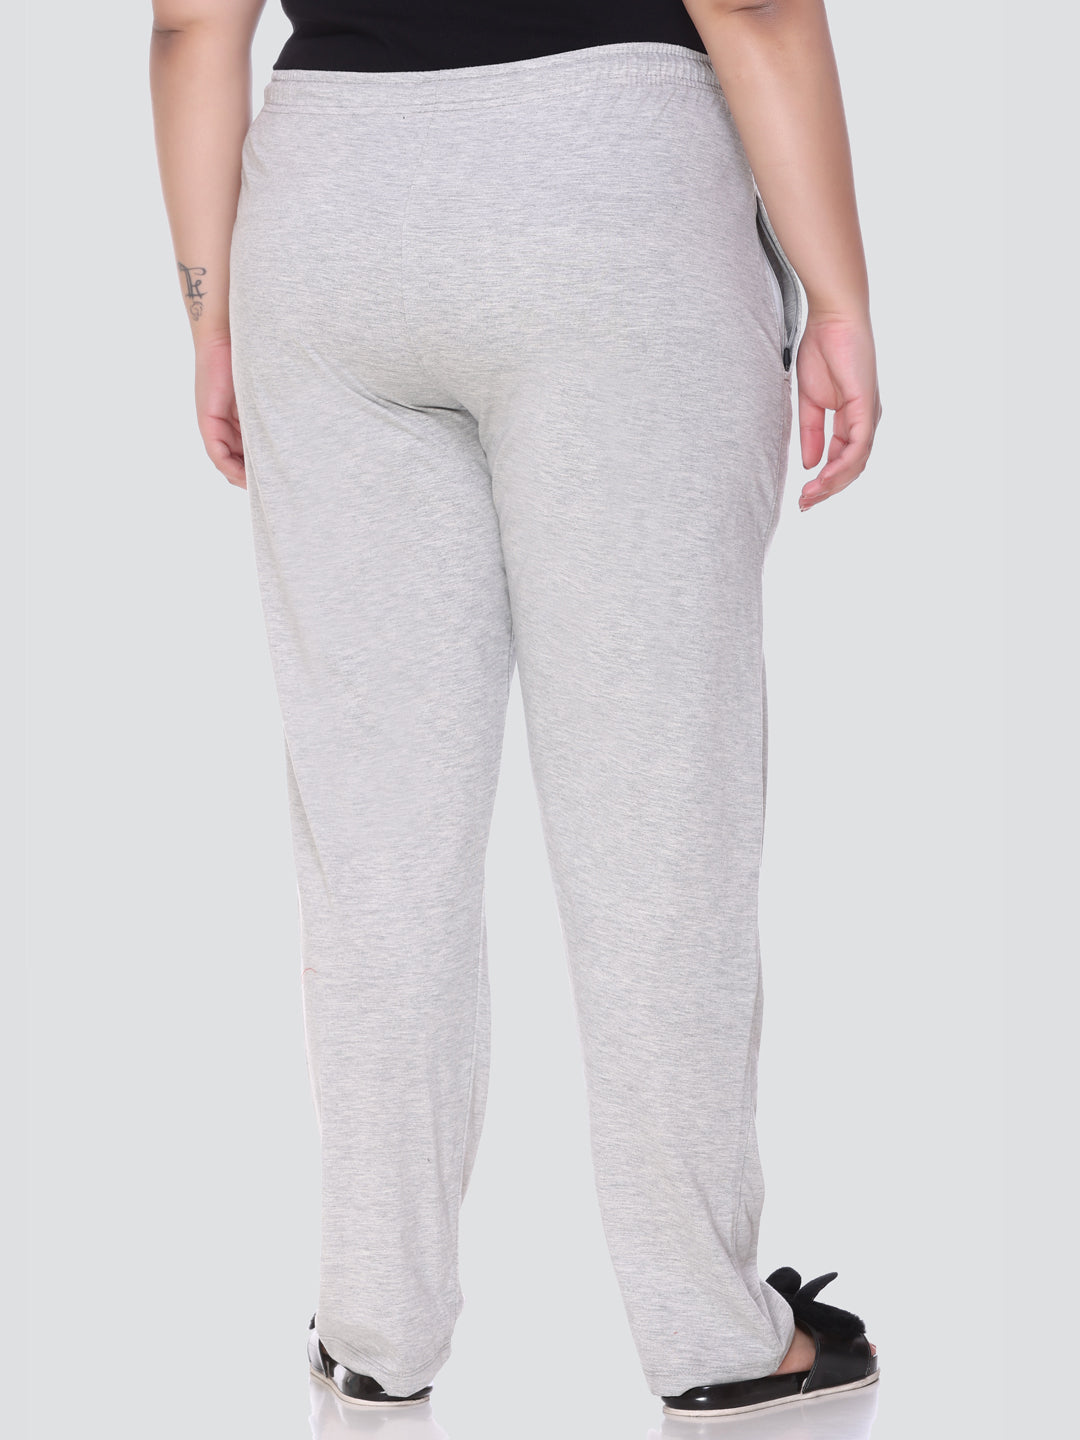 Comfy Grey Cotton Plus Size Track Pants For Women At Best Prices